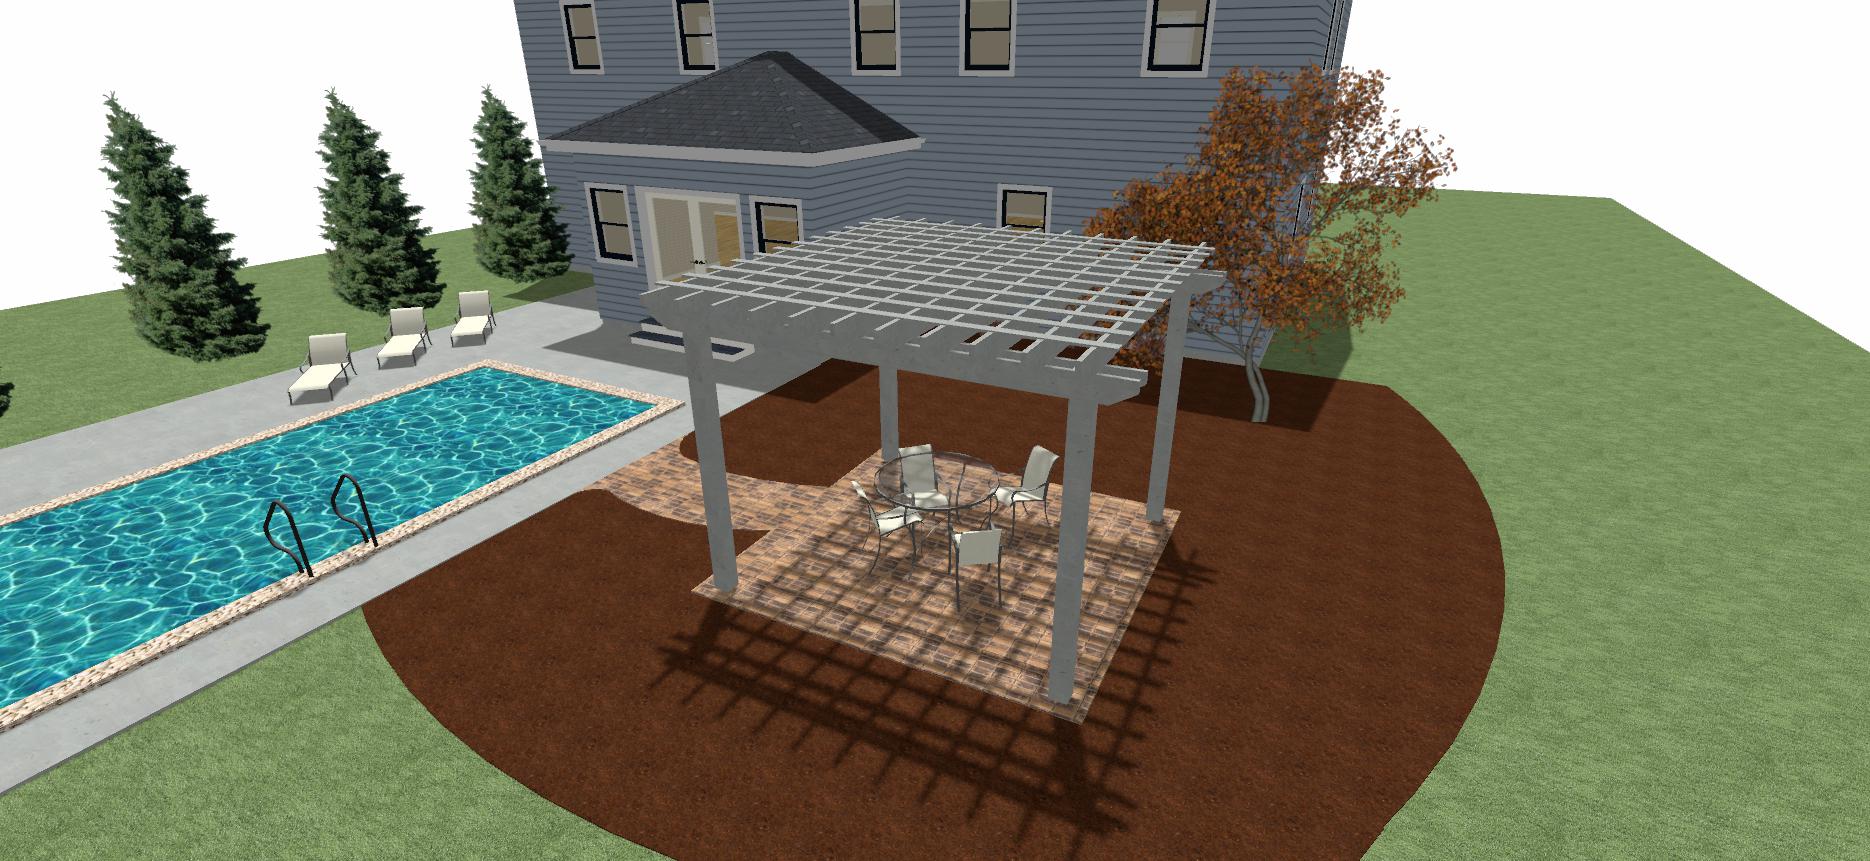 What the pergola will look like when it is done